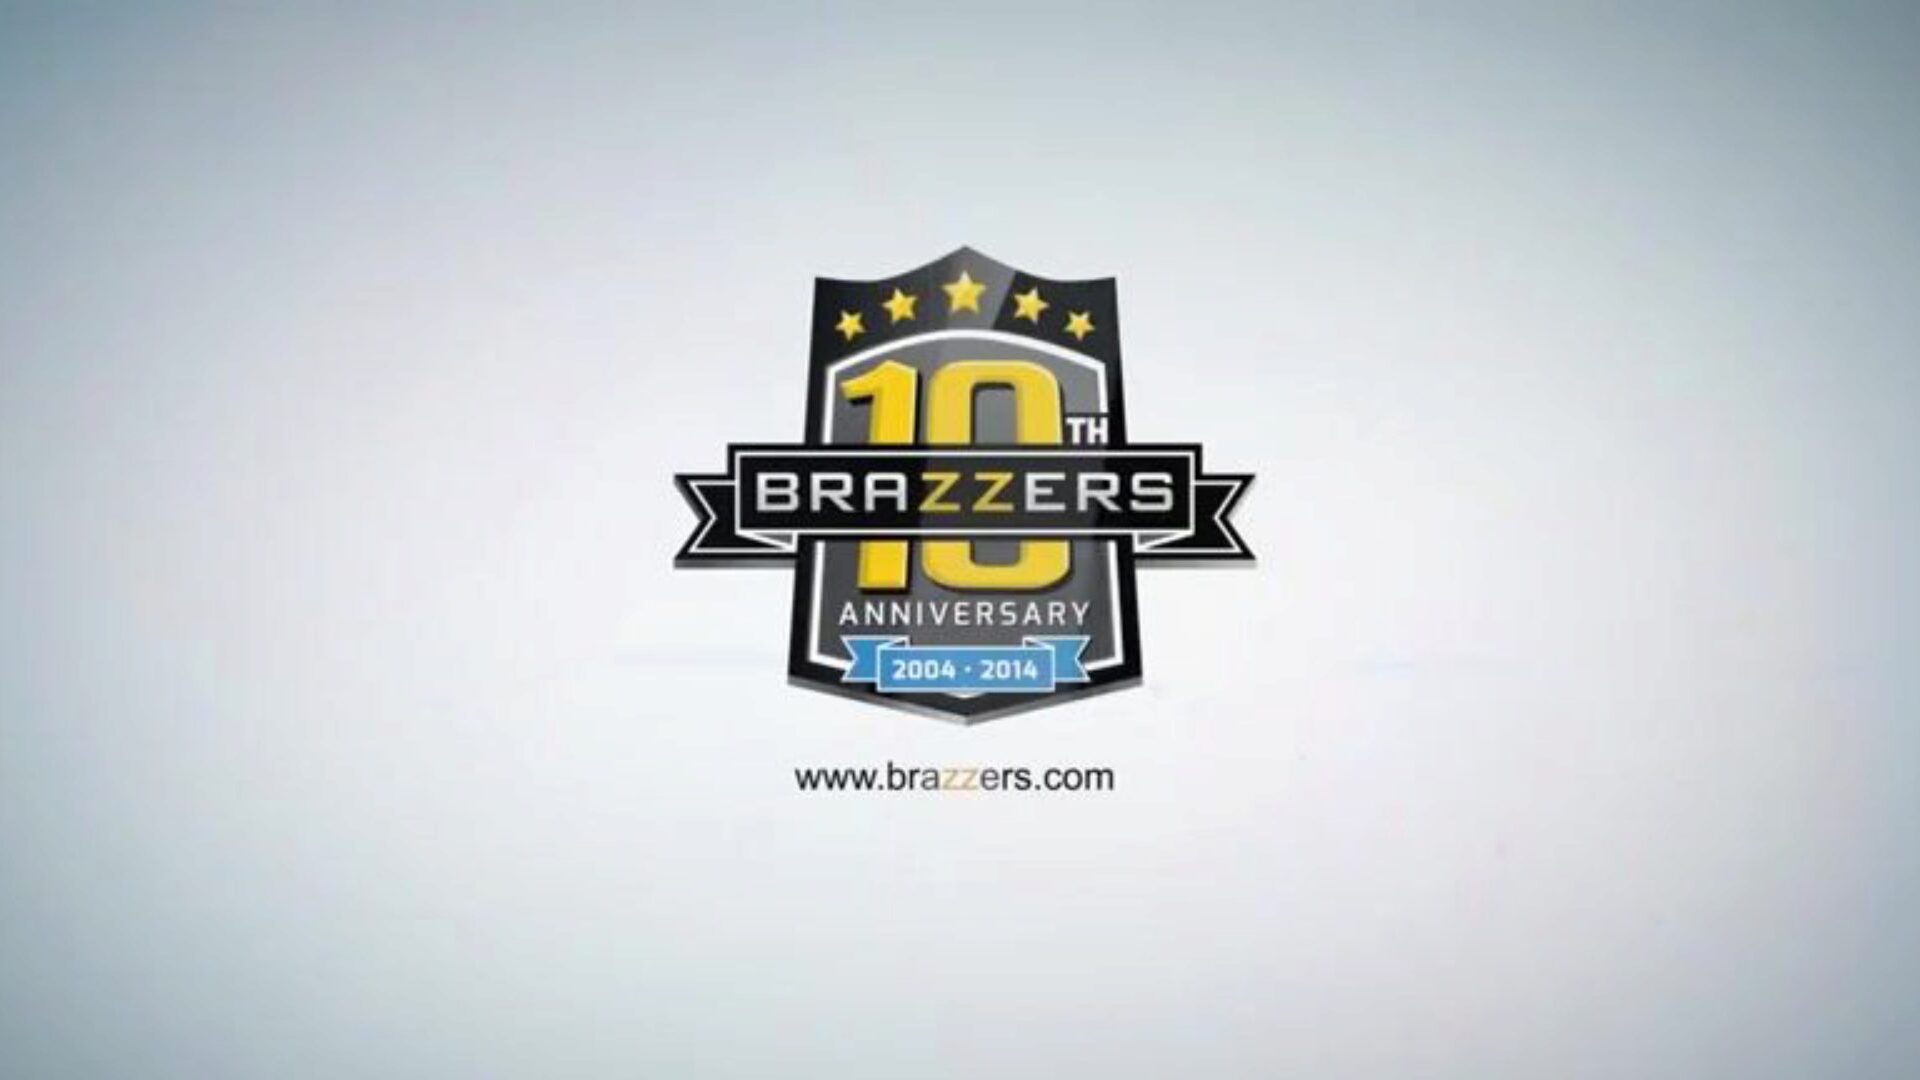 brazzers - mamei lui ii place sa pulverizeze Leigh Darby fucks sonnies friends